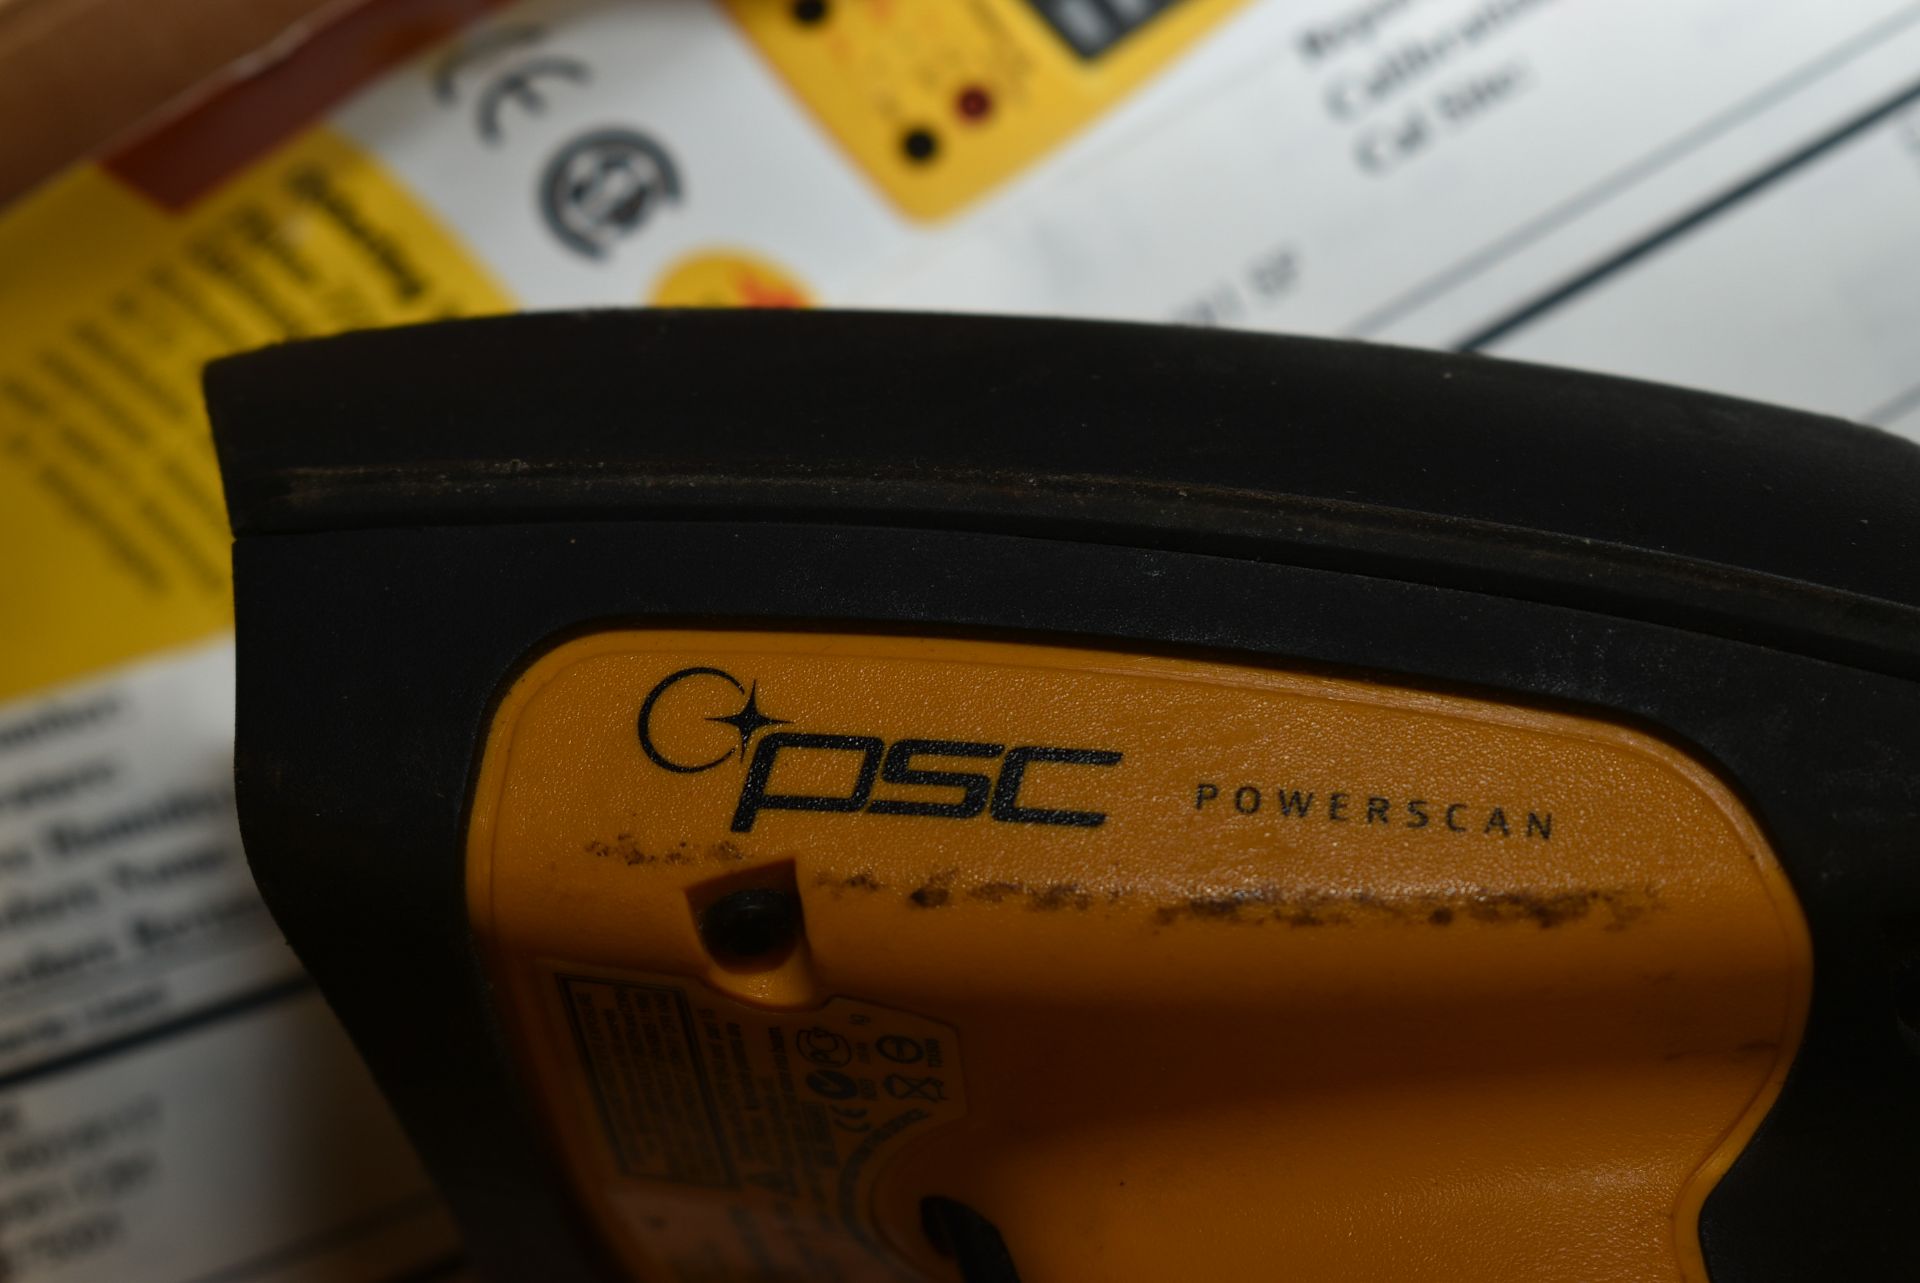 PSC POWERSCAN BAR CODE SCANNER [RIGGING FEE FOR LOT #2636 - $TBD USD PLUS APPLICABLE TAXES] - Image 2 of 3